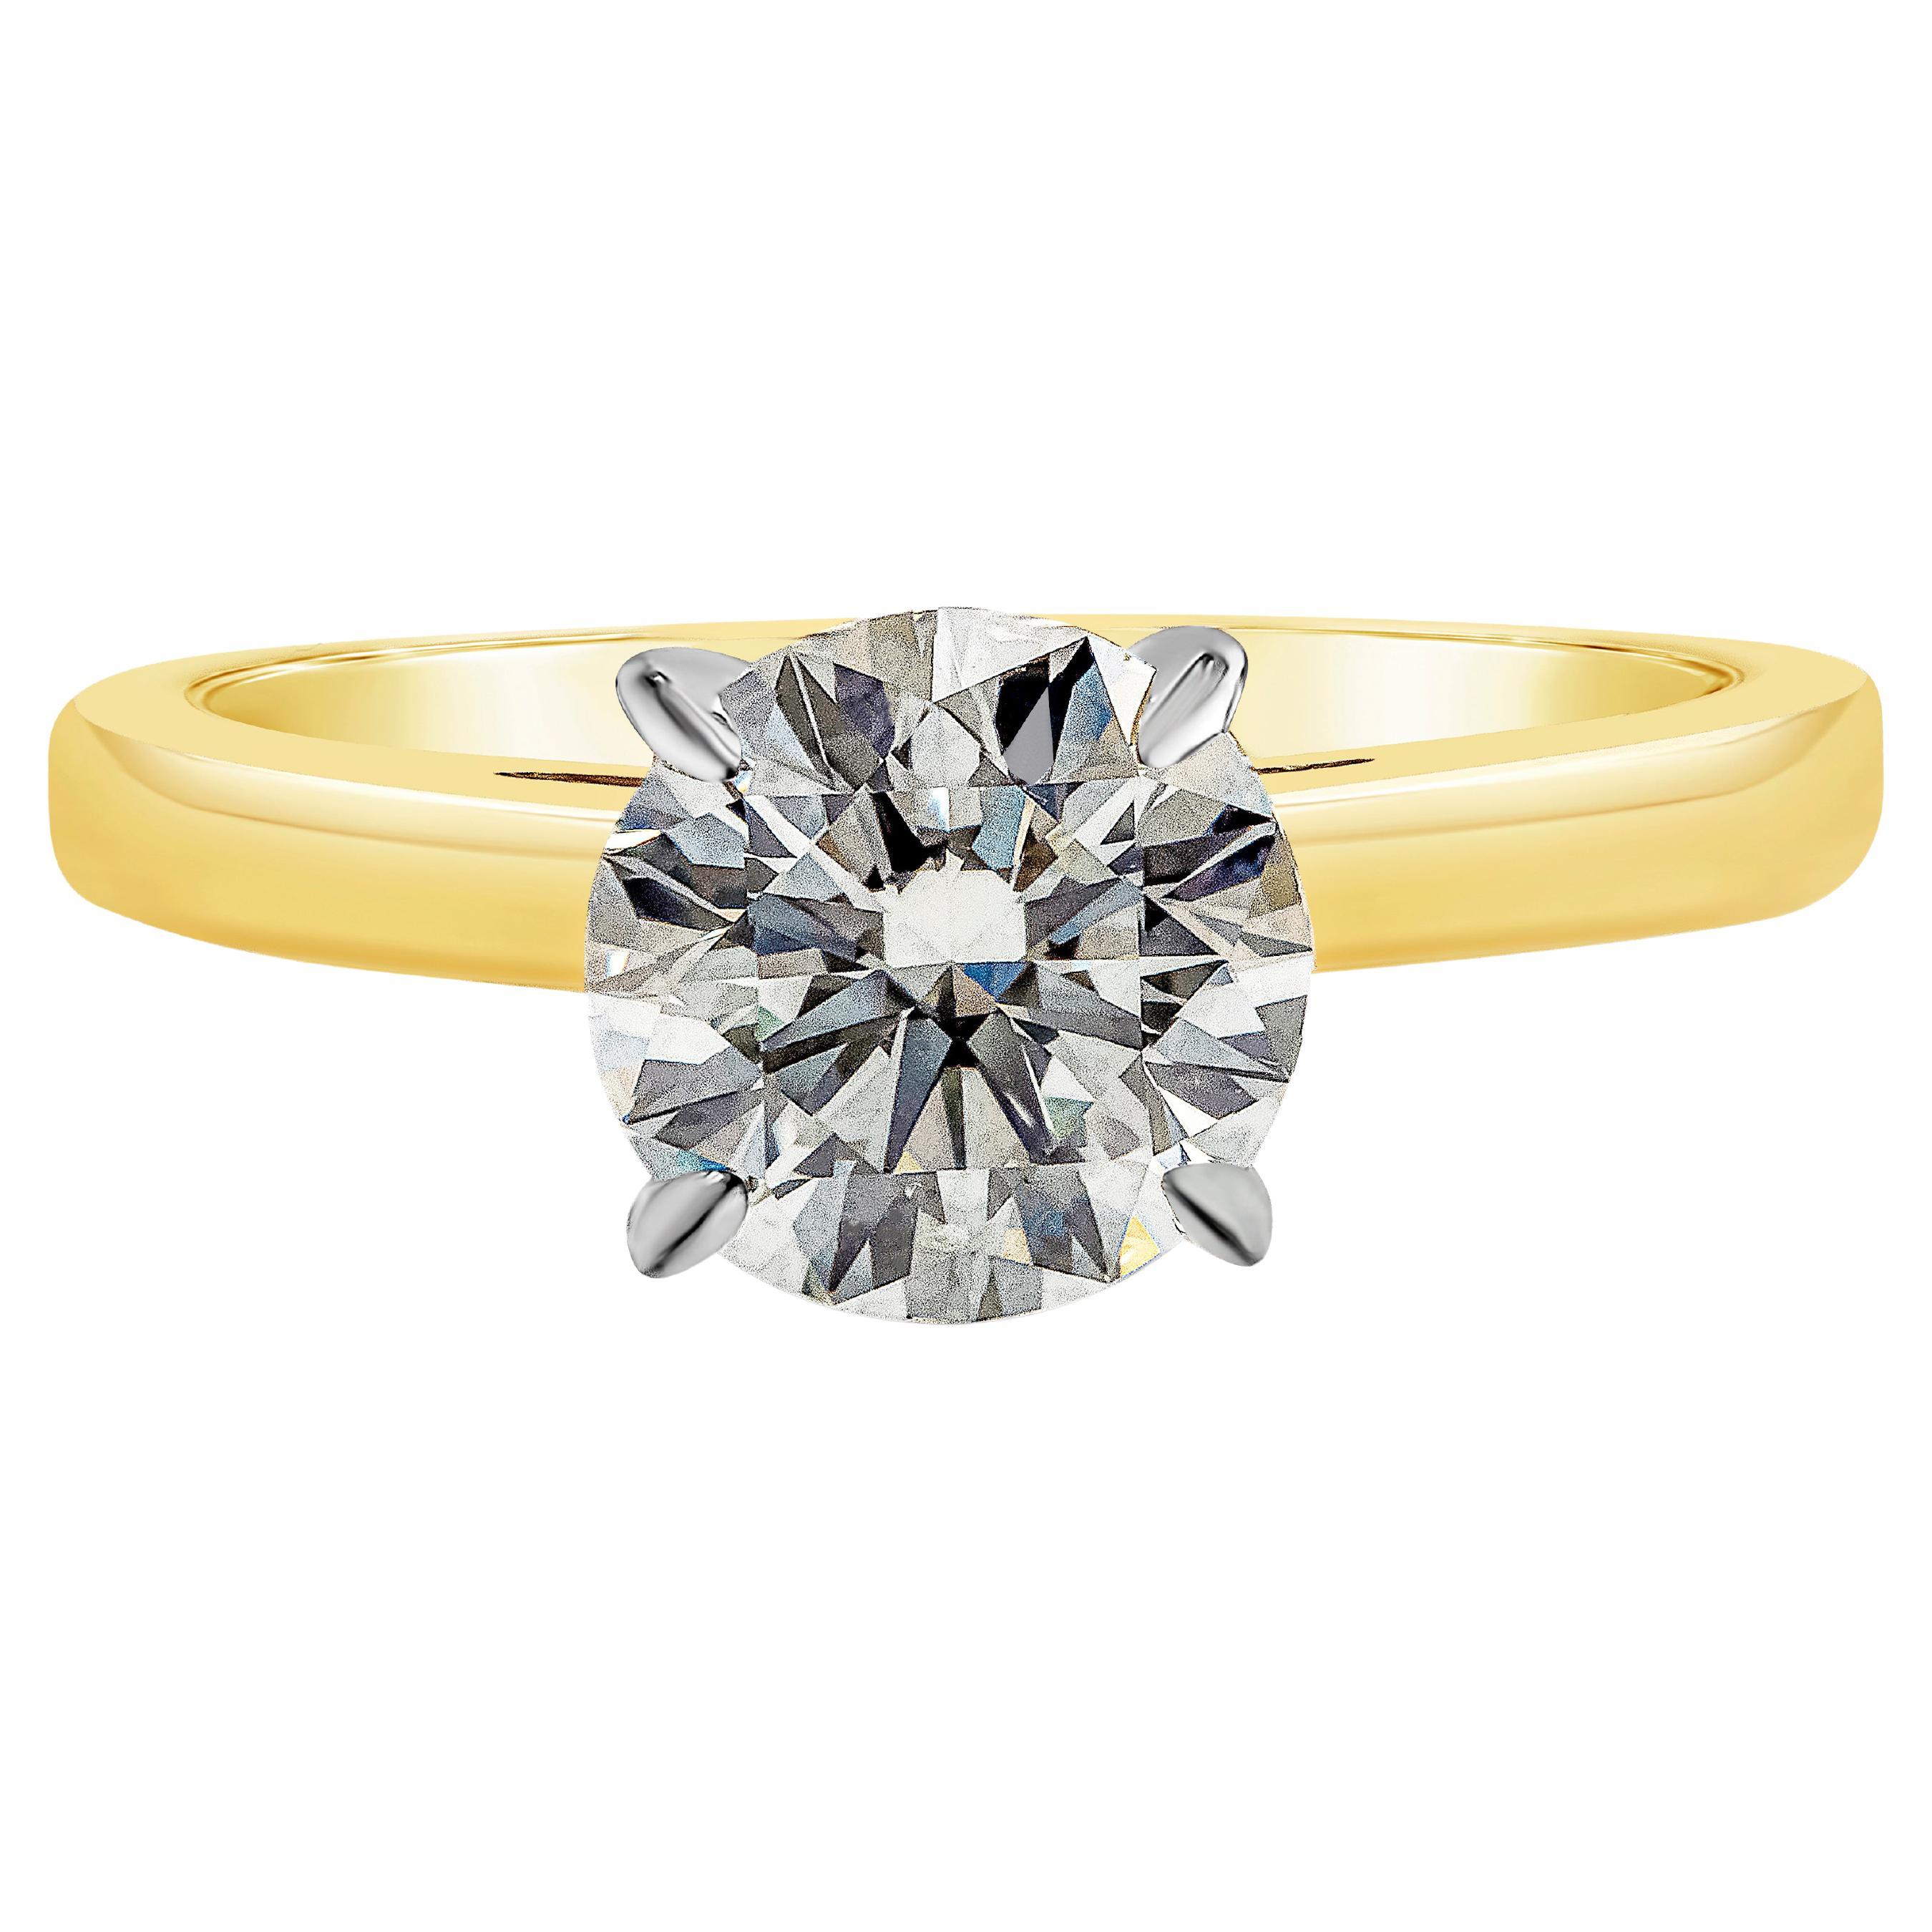 GIA Certified 1.57 Carat Round Diamond Solitaire Engagement Ring